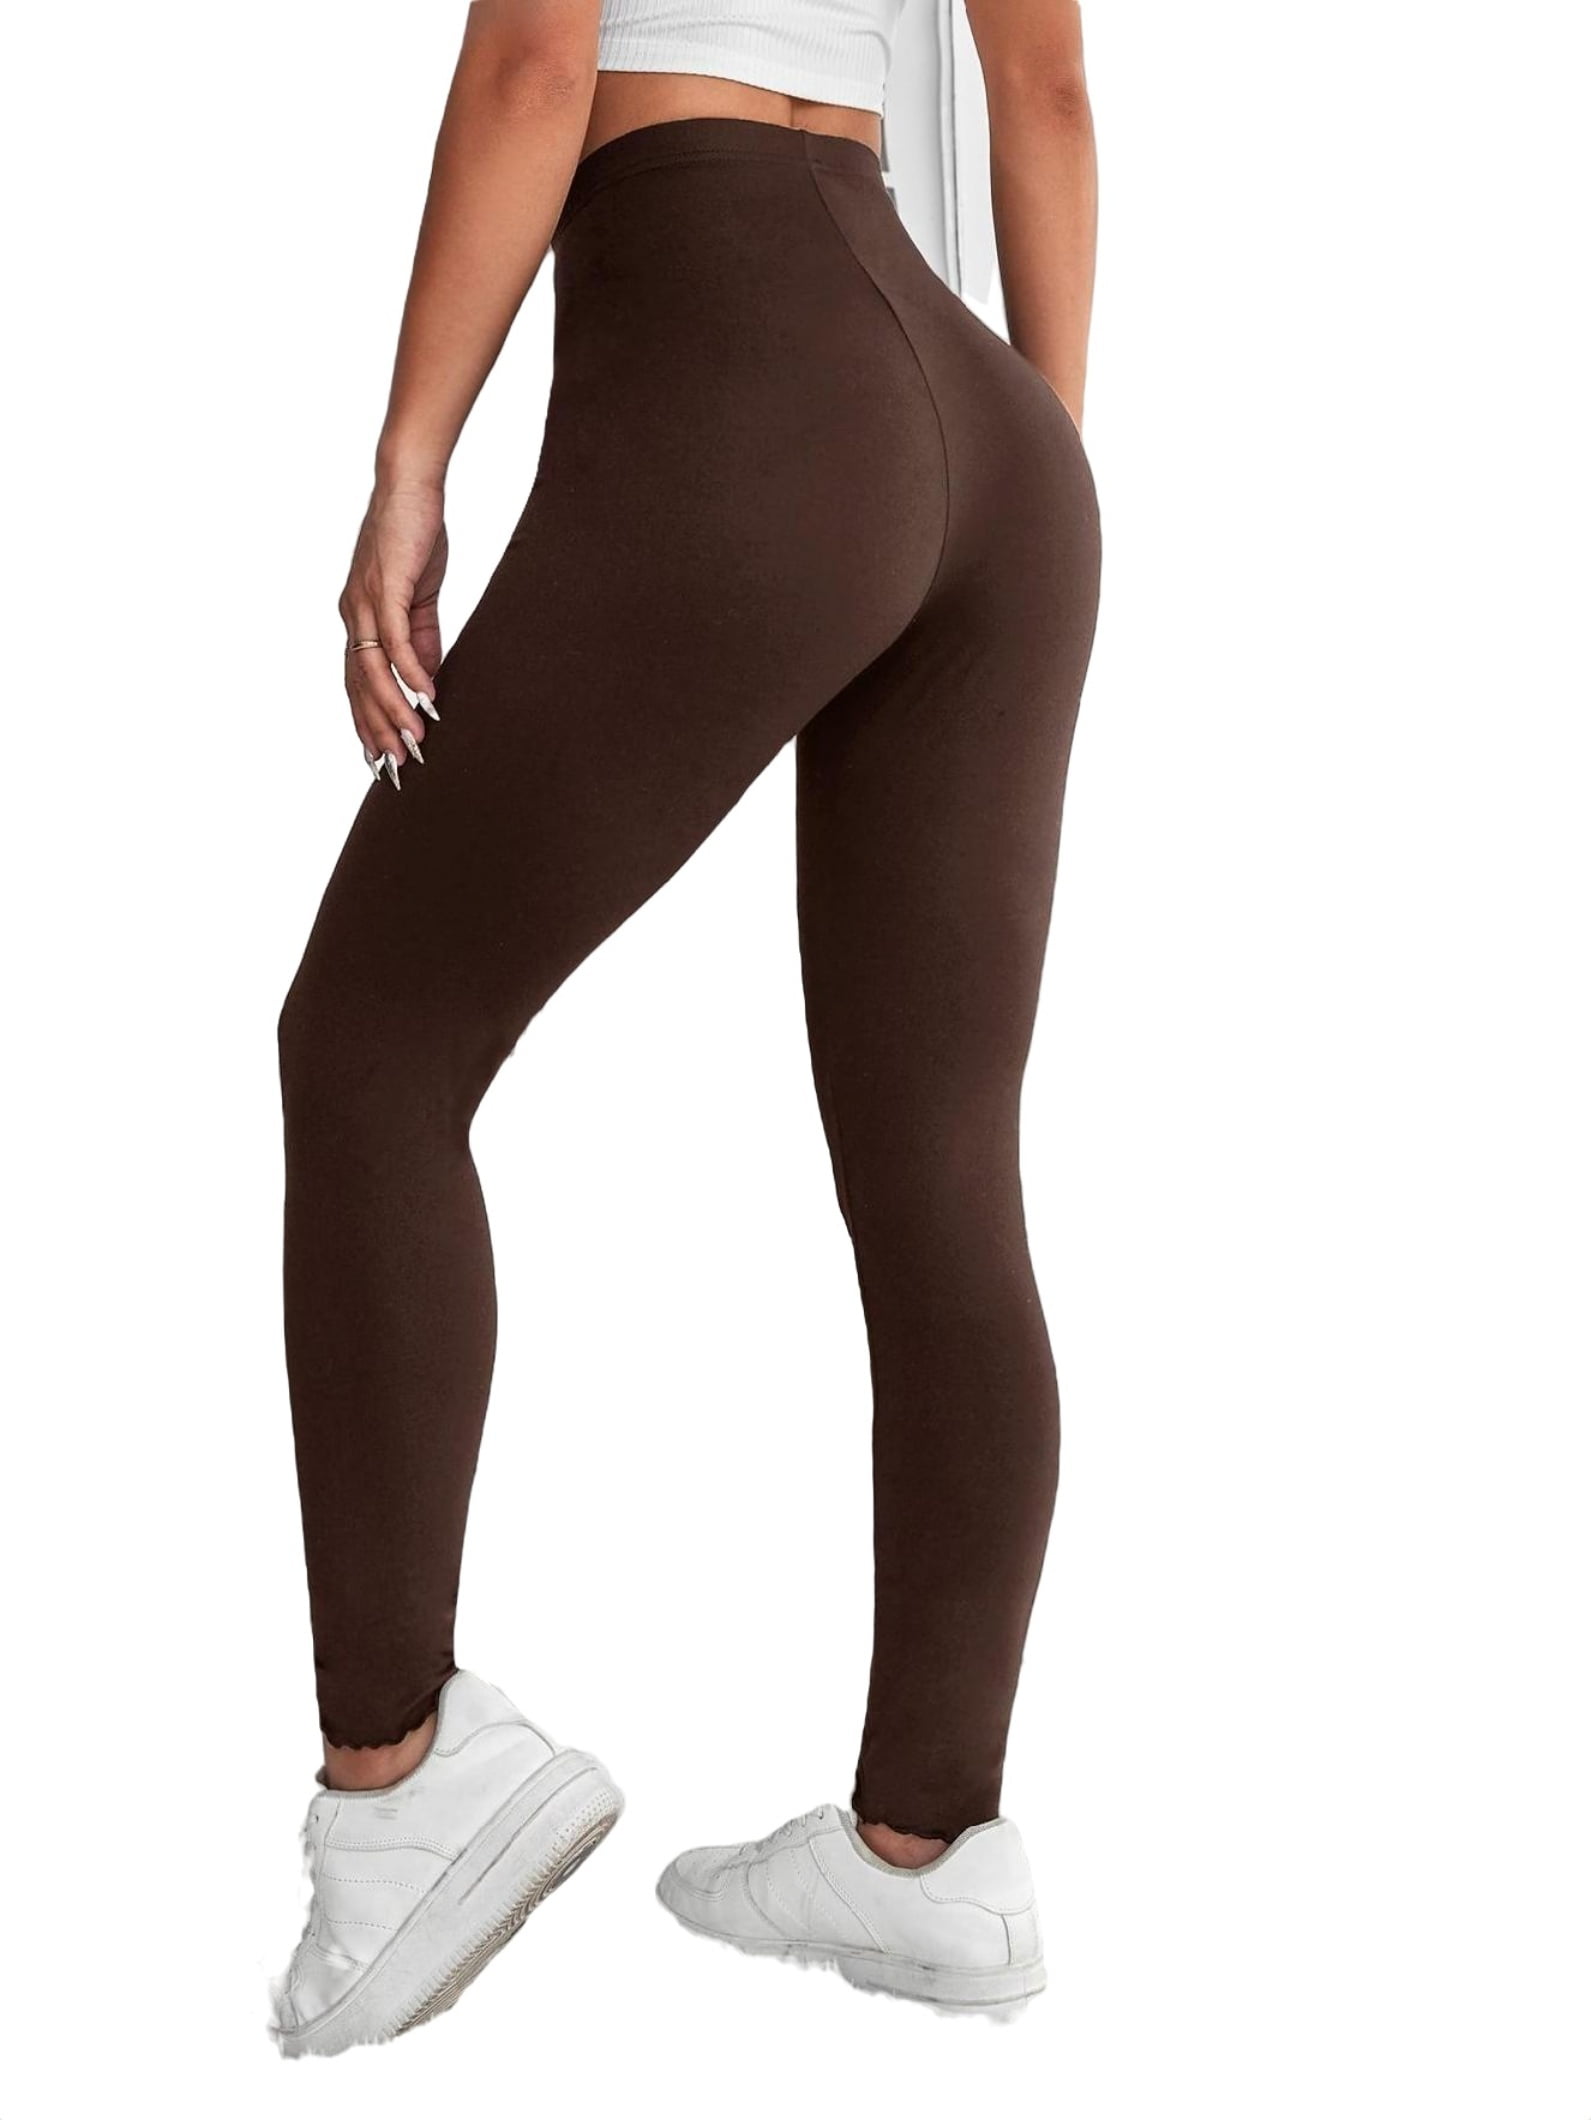 GUESS Women's Carmel Athleisure Leggings Brown Size Small – Steals